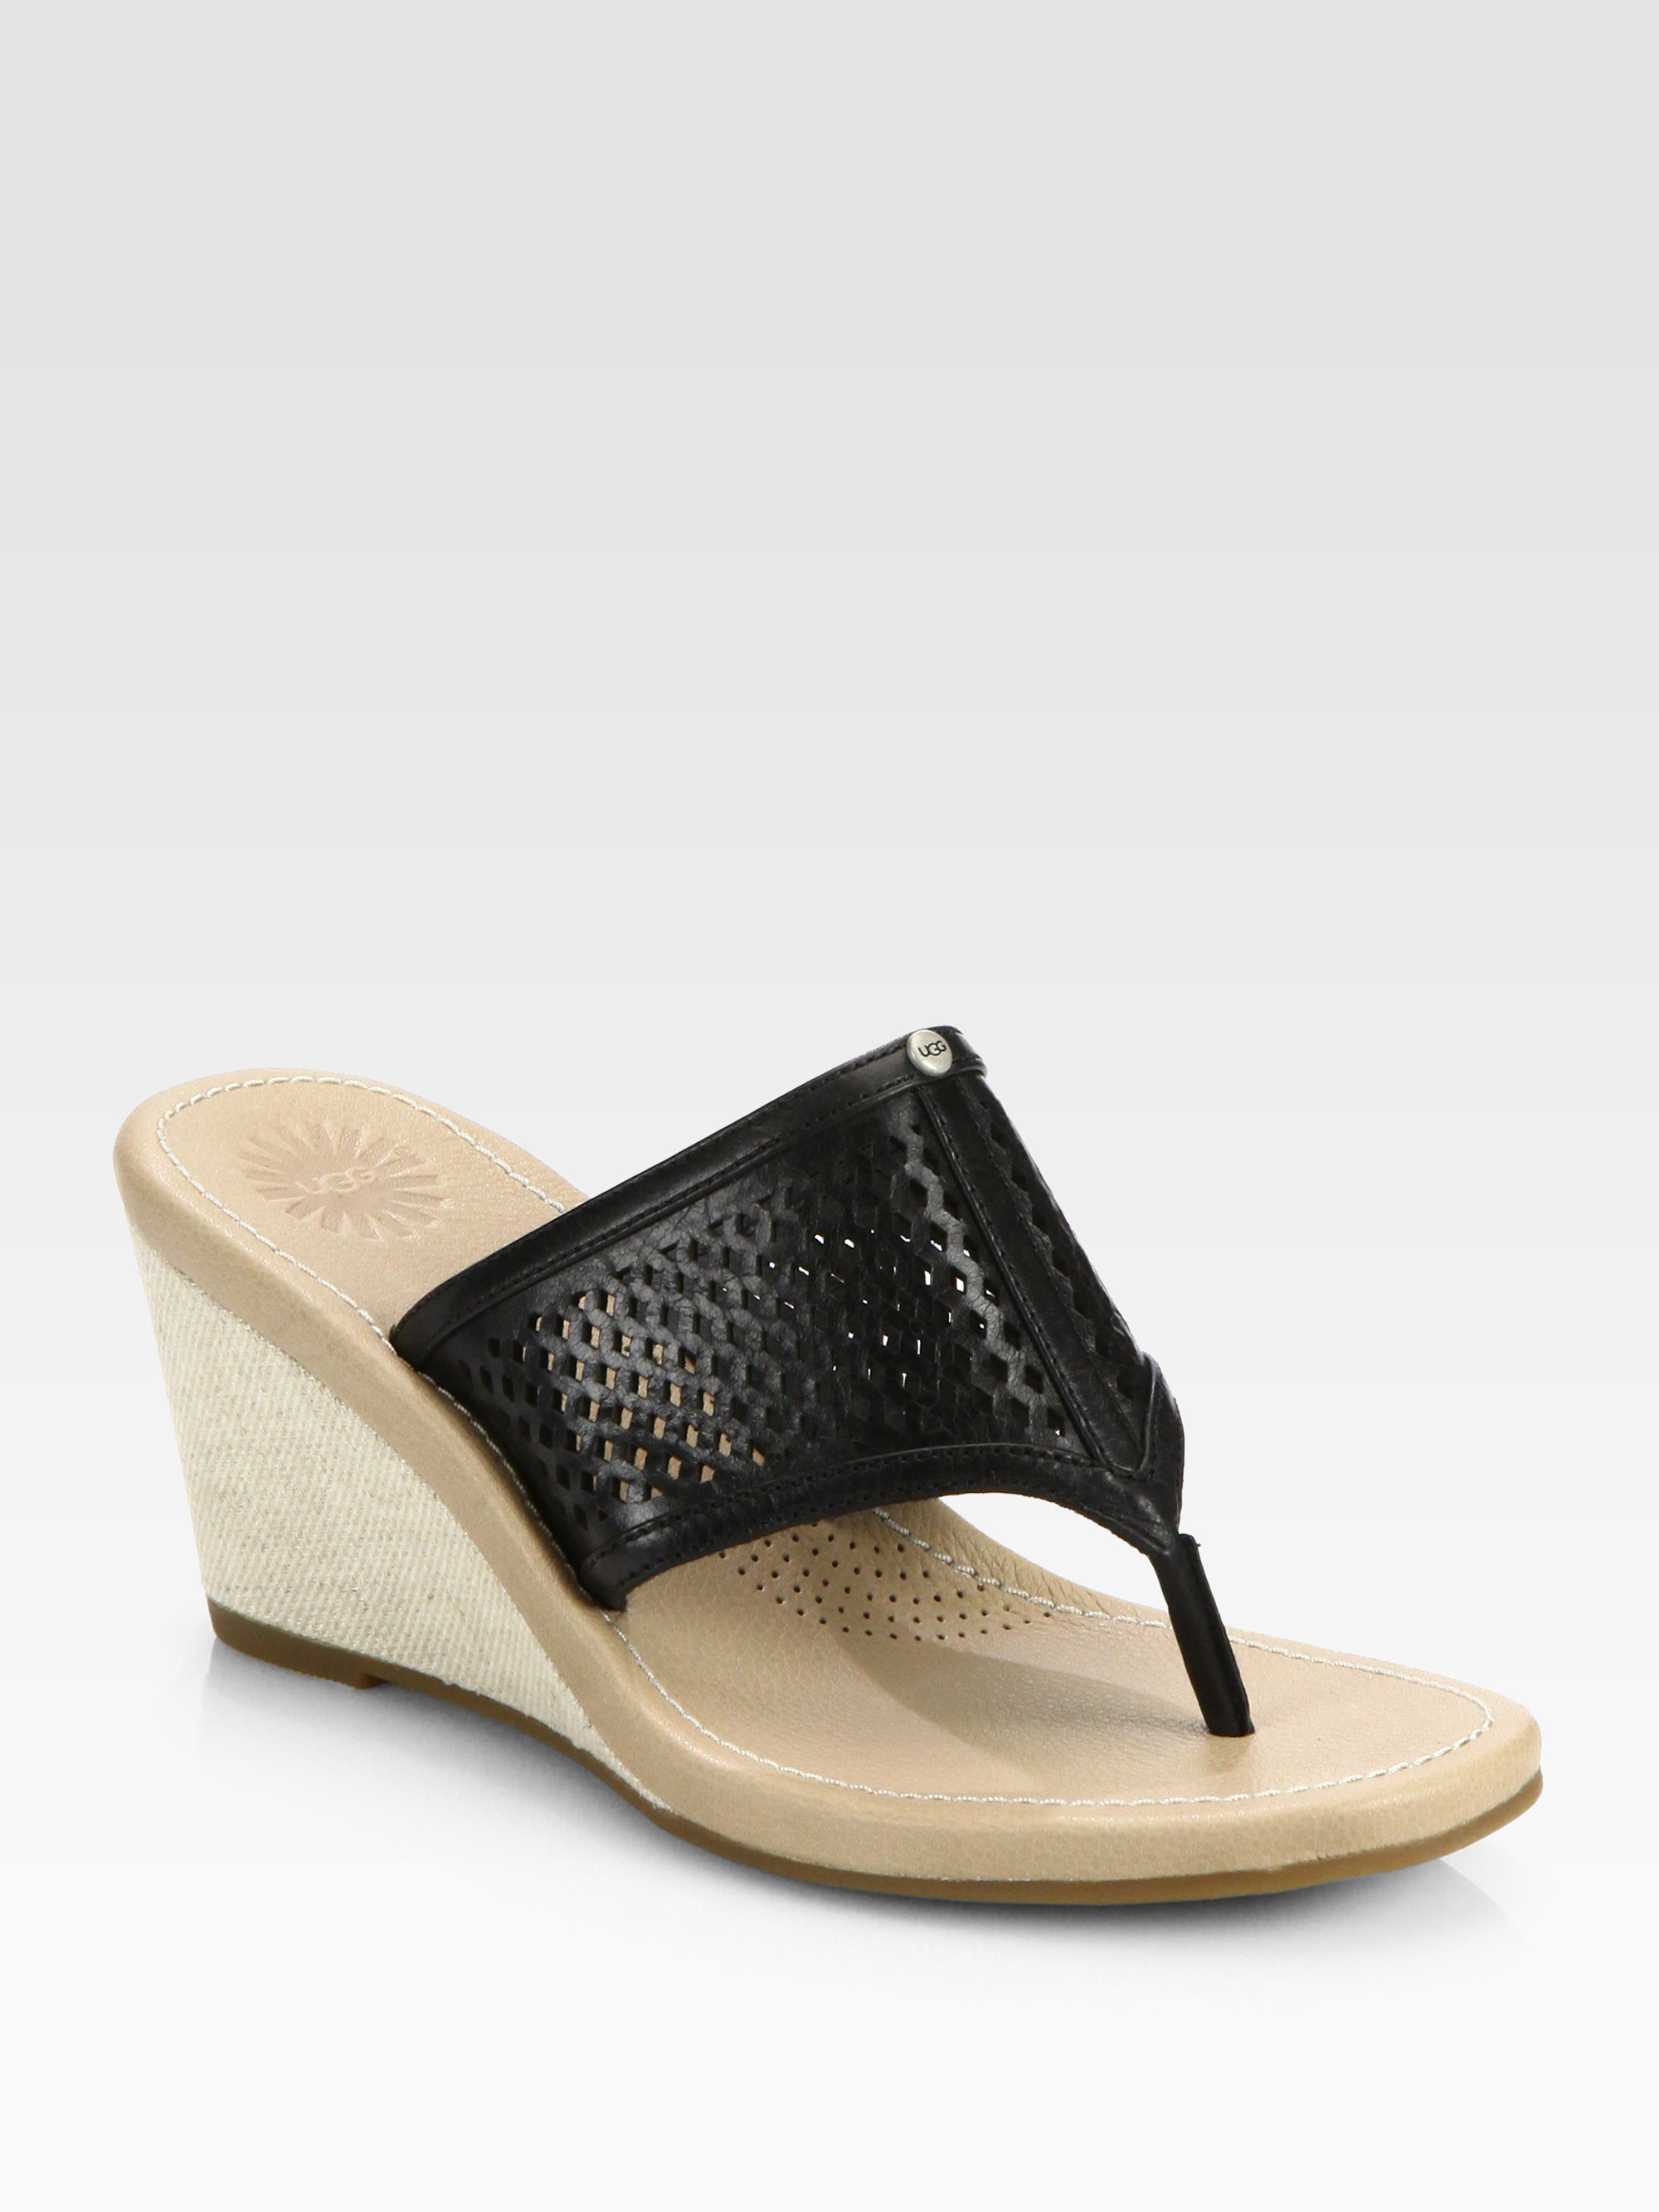 Lyst - UGG Solena Leather Canvas Wedge Sandals in Black